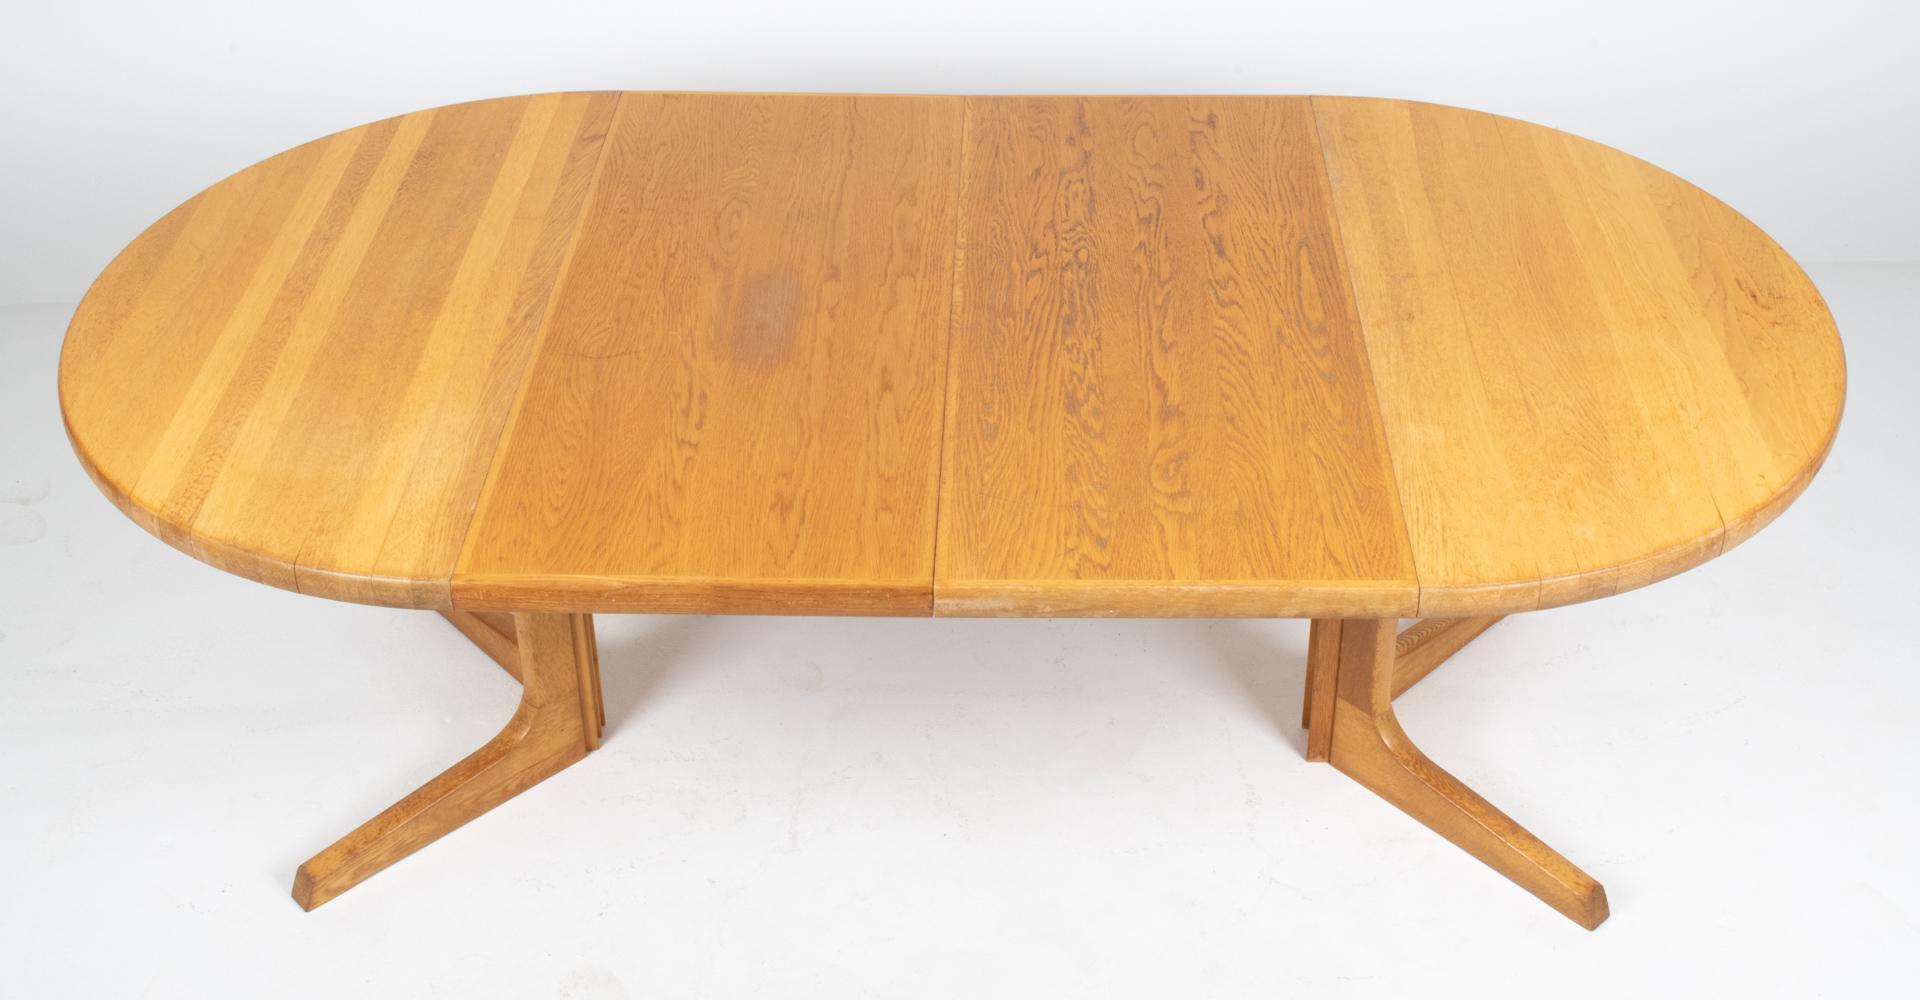 Oak Mid-Century Modern Extendable Dining Room Table by Niels Otto Møller, 1970s For Sale 12